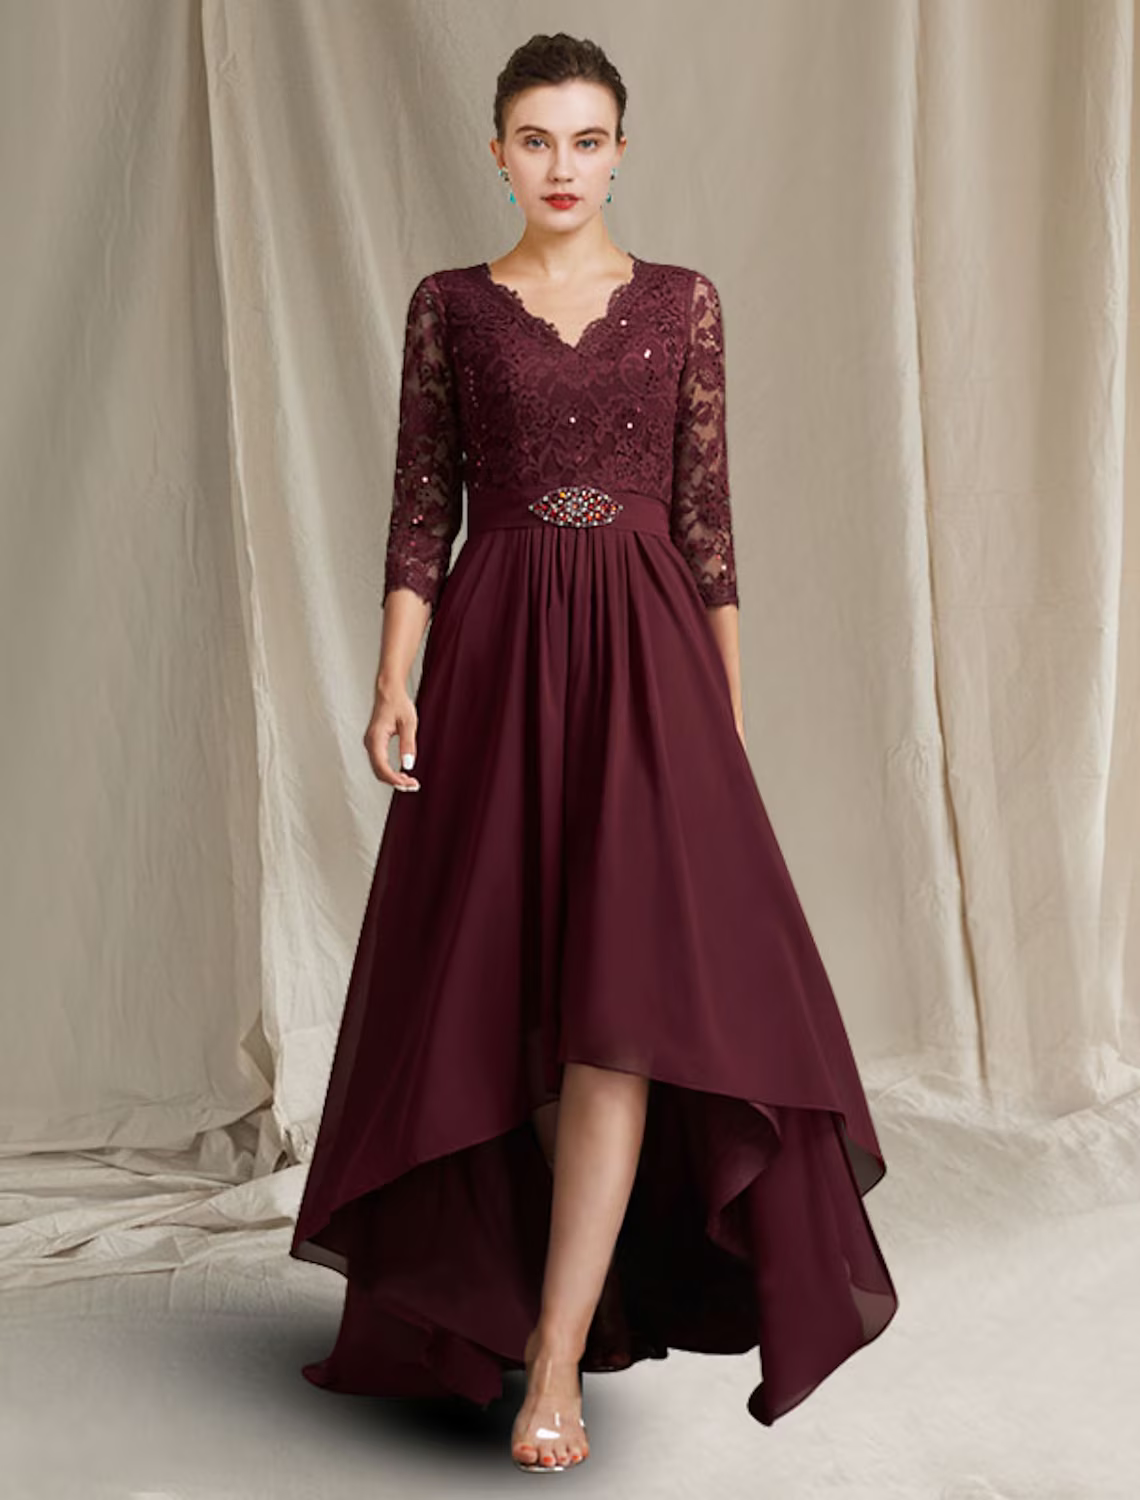 A-Line Mother of the Bride Dress Plus Size Elegant High Low V Neck Asymmetrical Floor Length Chiffon Lace Length Sleeve with Pleats Appliques Crystal Brooch